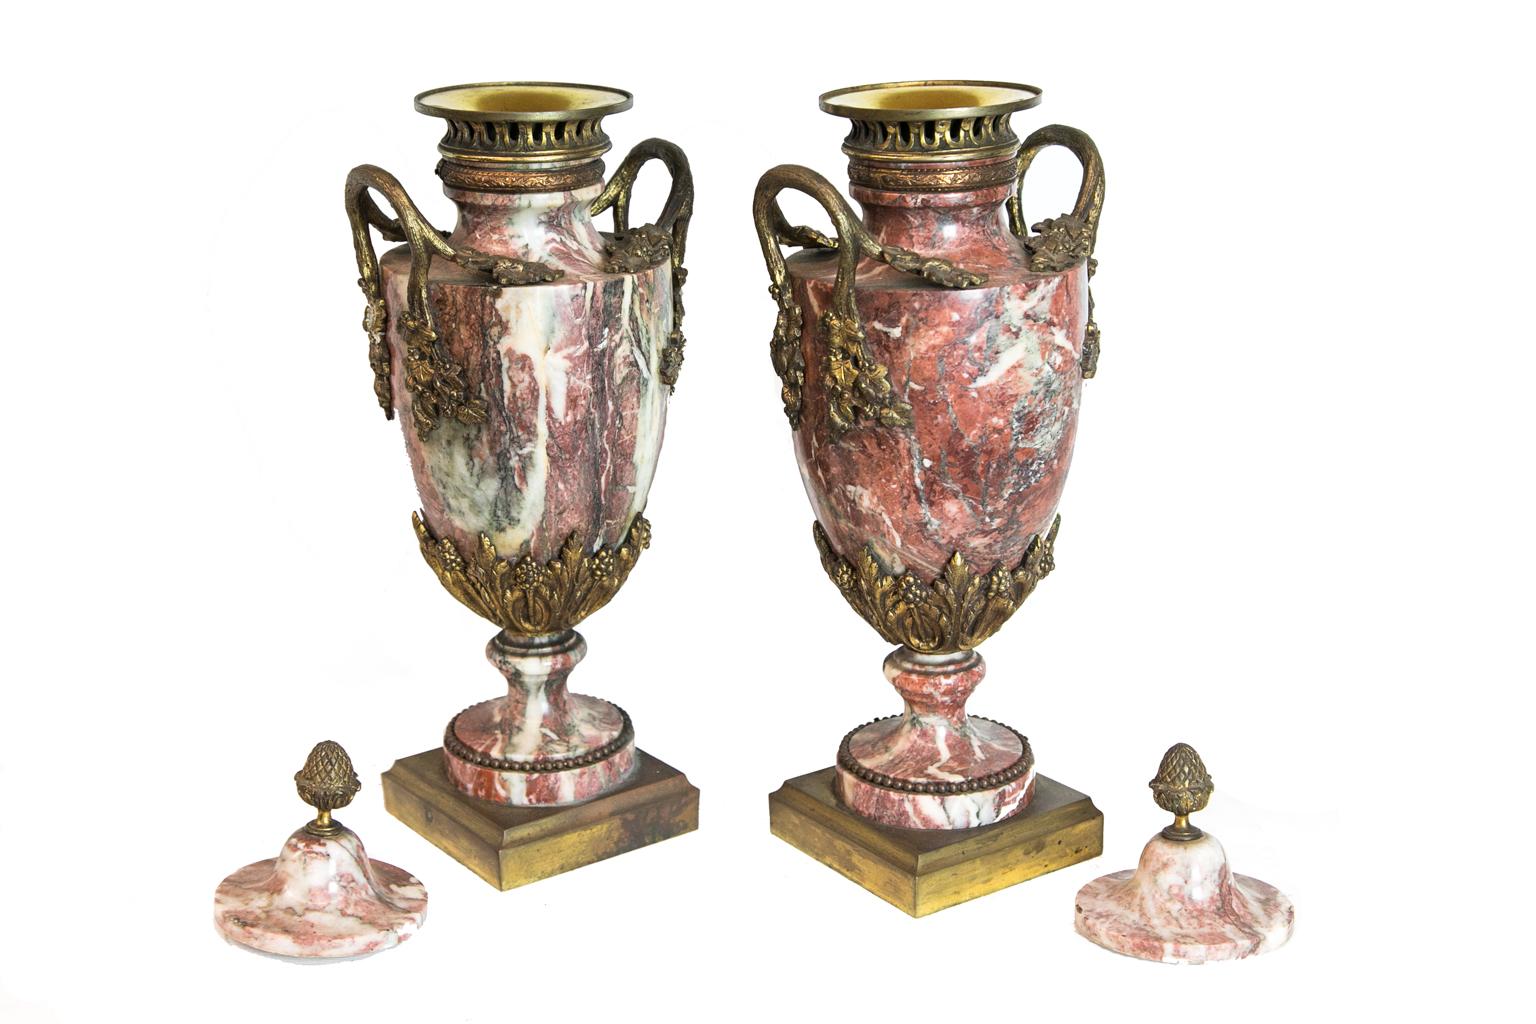 Pair of French Marble and Ormolu Cassolettes For Sale 4